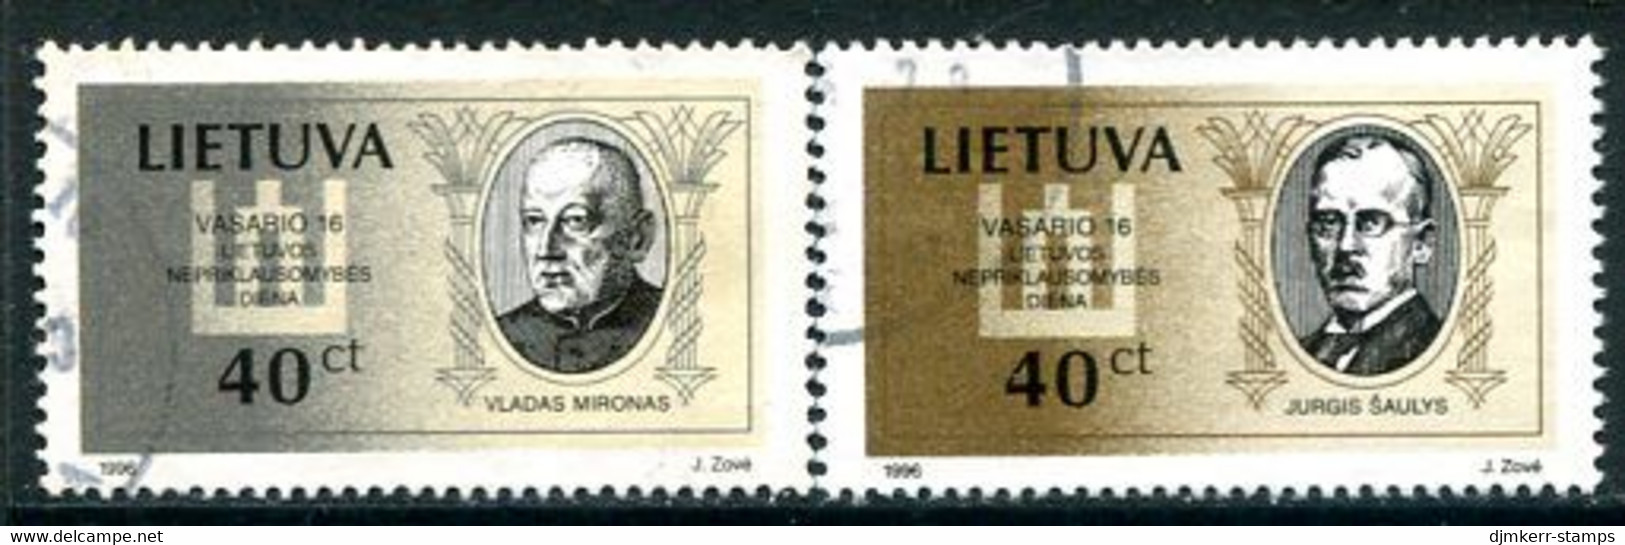 LITHUANIA 1996 Independence Day Used.  Michel 606-07 - Litouwen